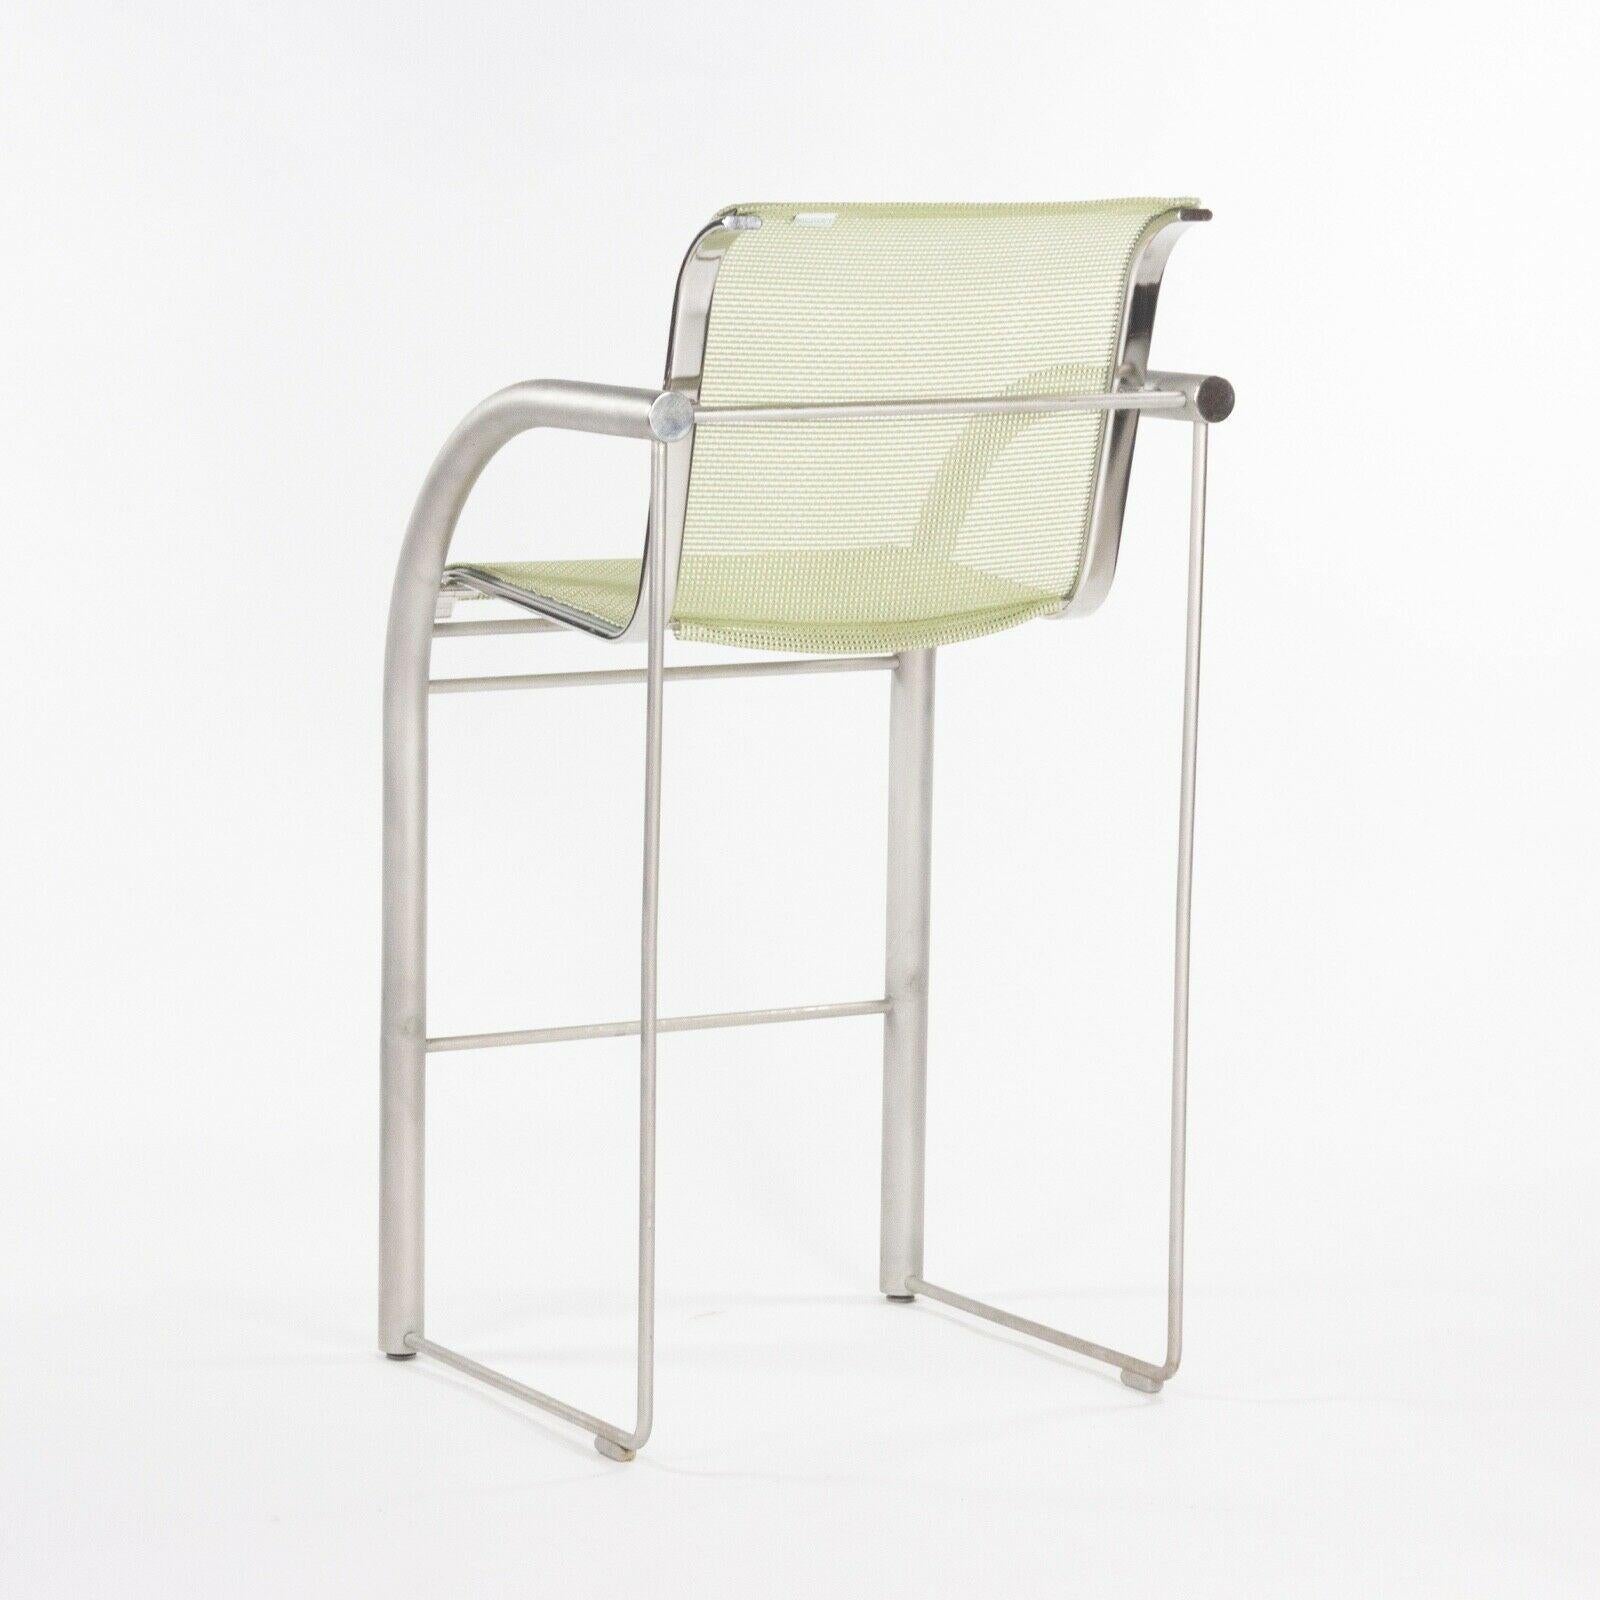 Steel Prototype Richard Schultz 2002 Collection Stainless Bar Stool with Outdoor Mesh For Sale